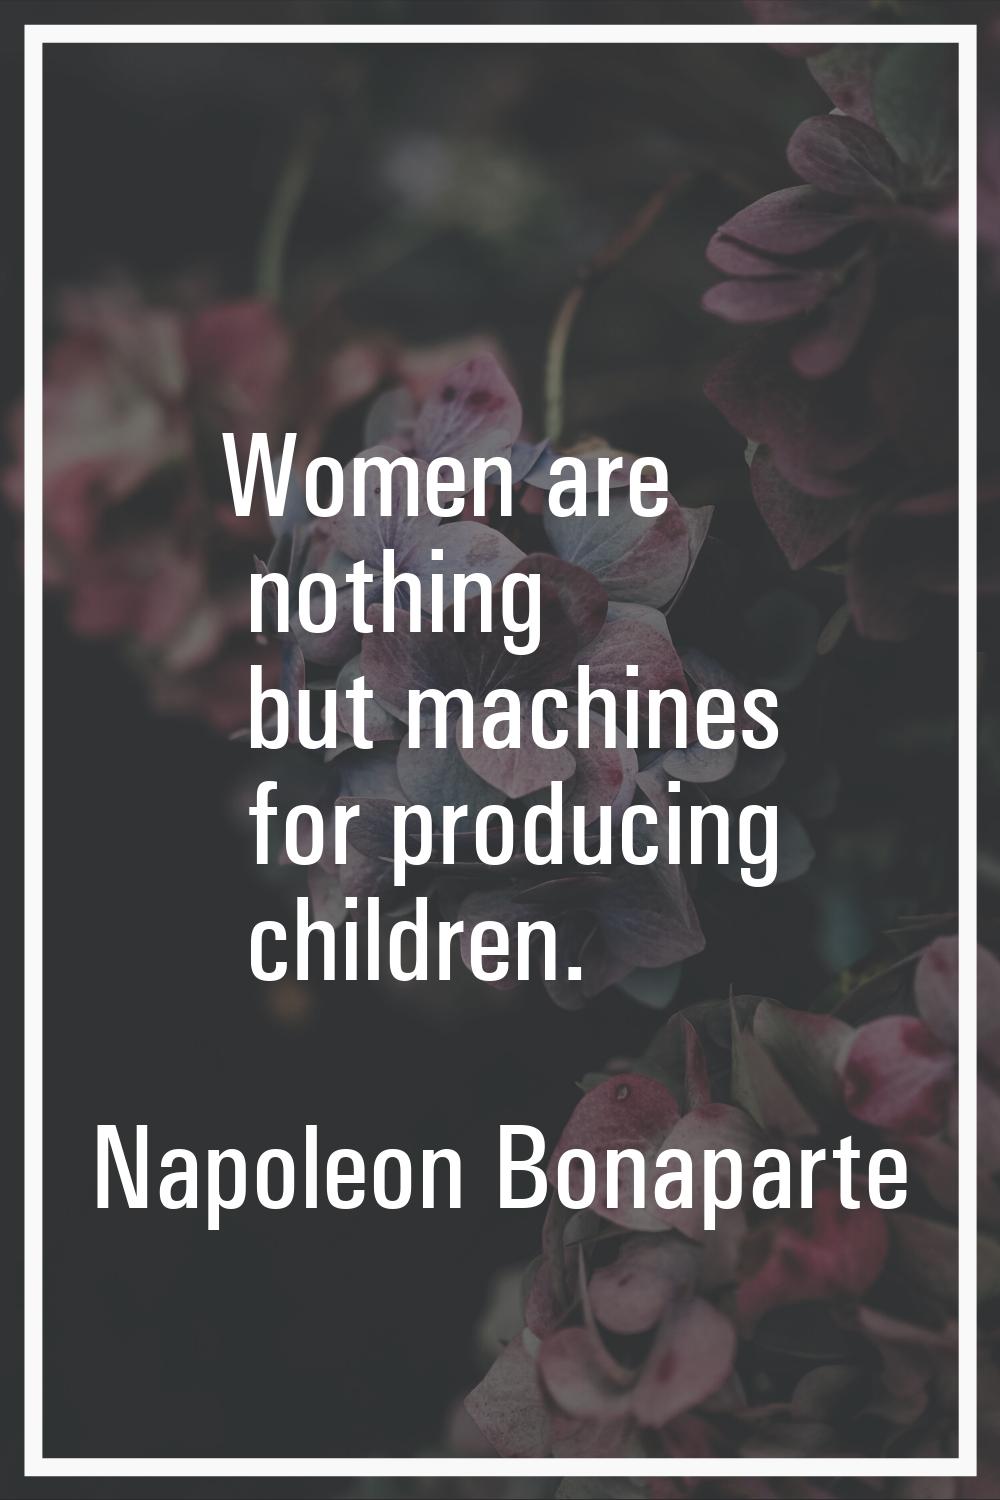 Women are nothing but machines for producing children.